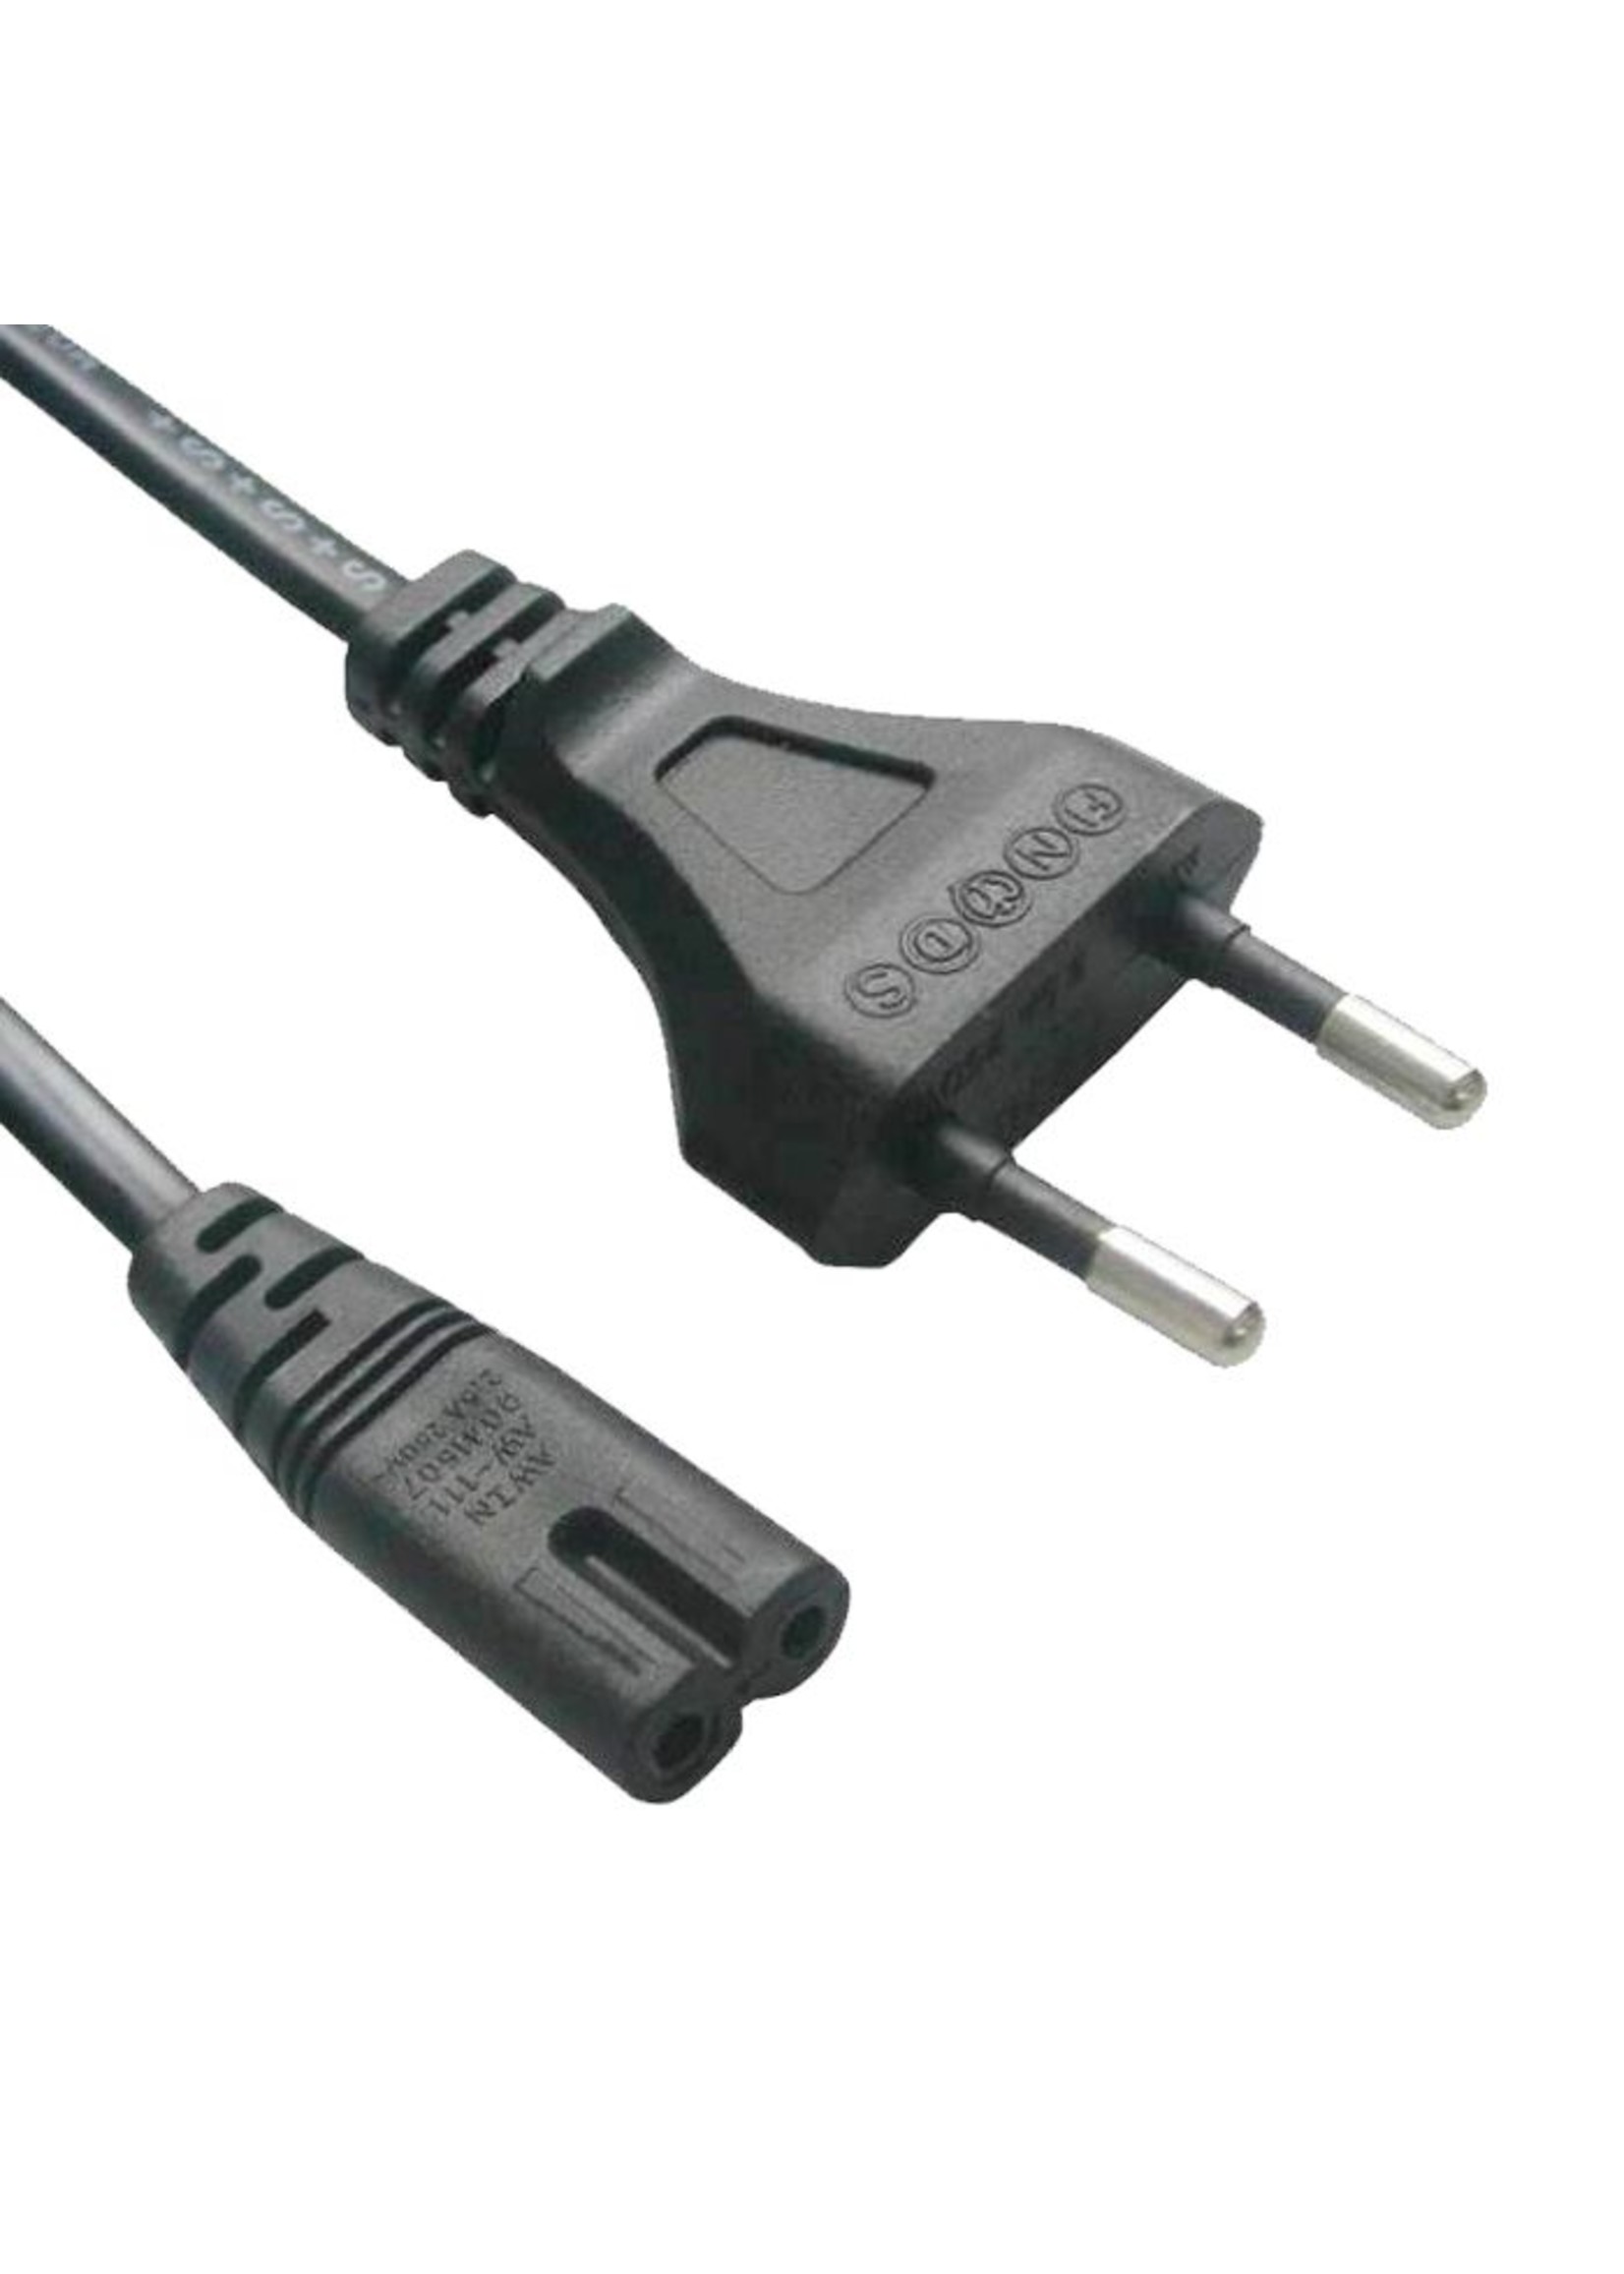 Dolphix Power Cable Universal AC 1,8 Meter